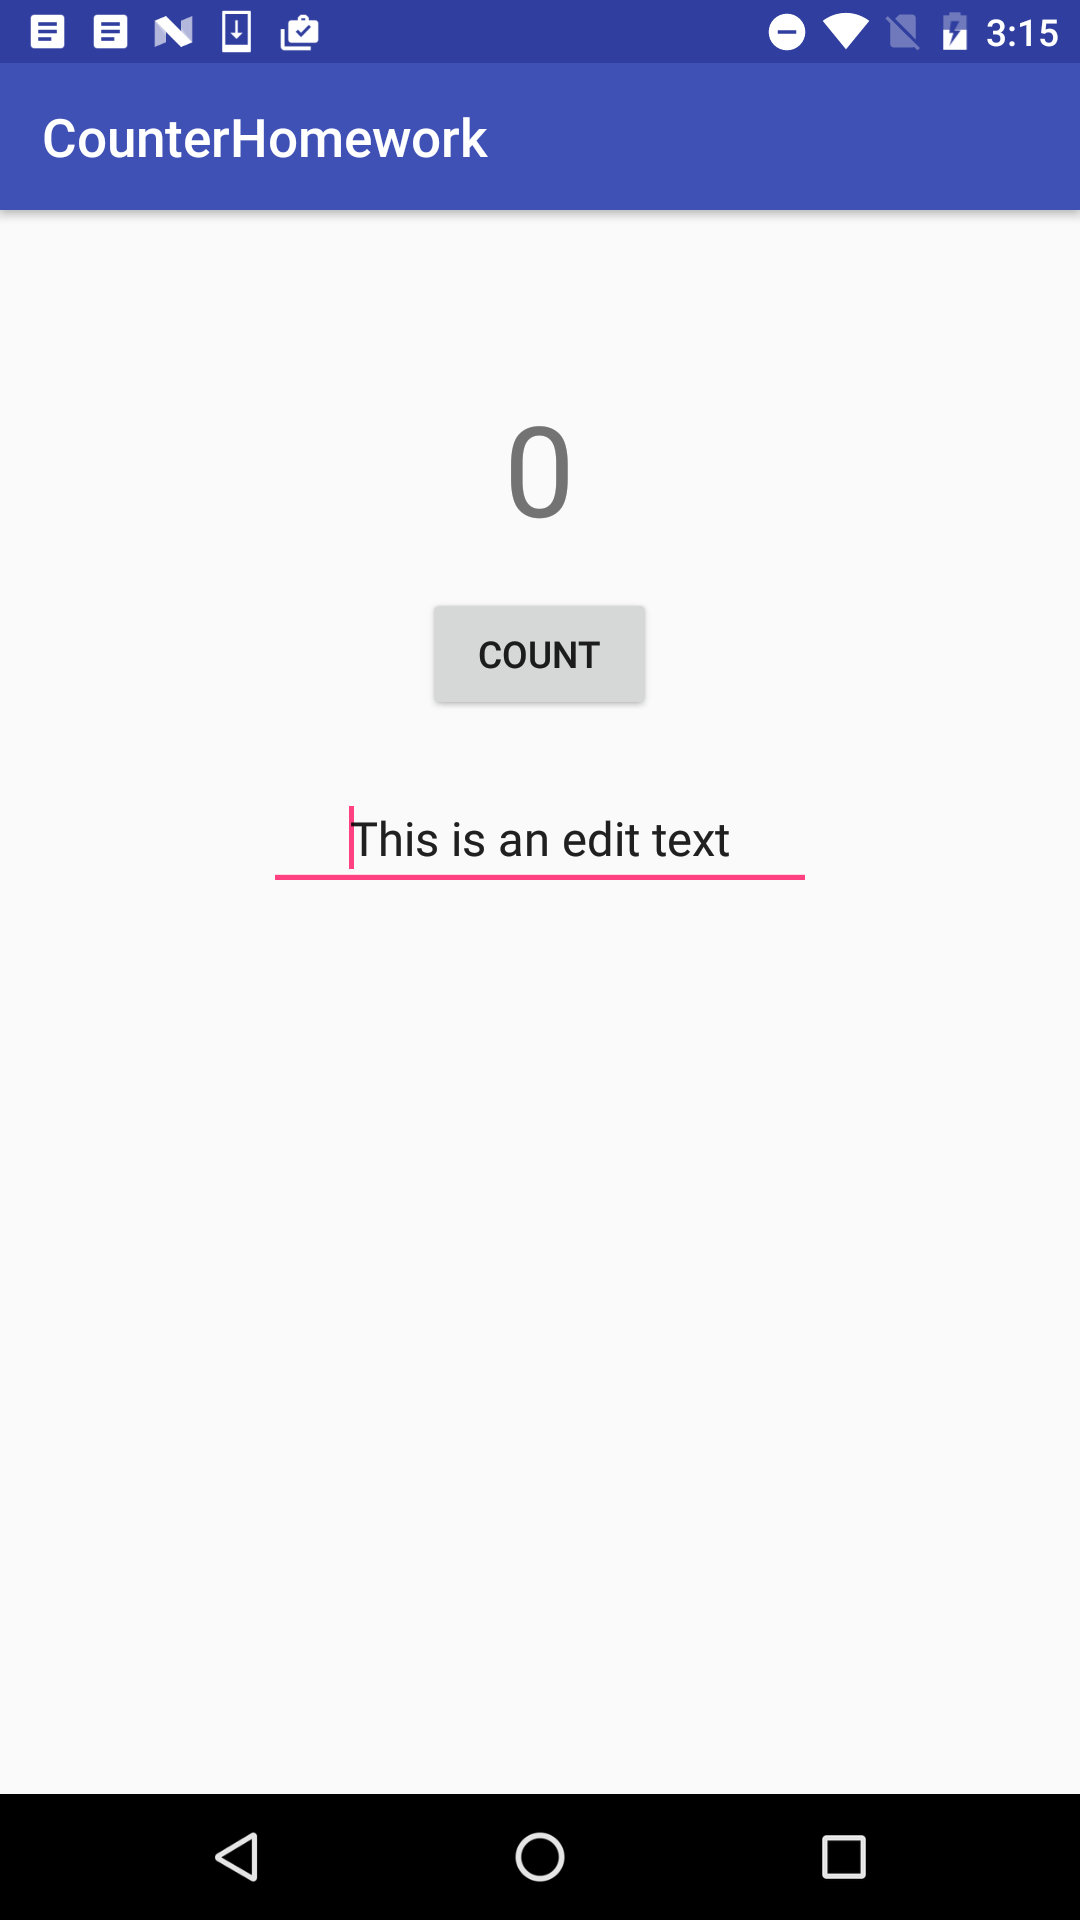 Simple counter app